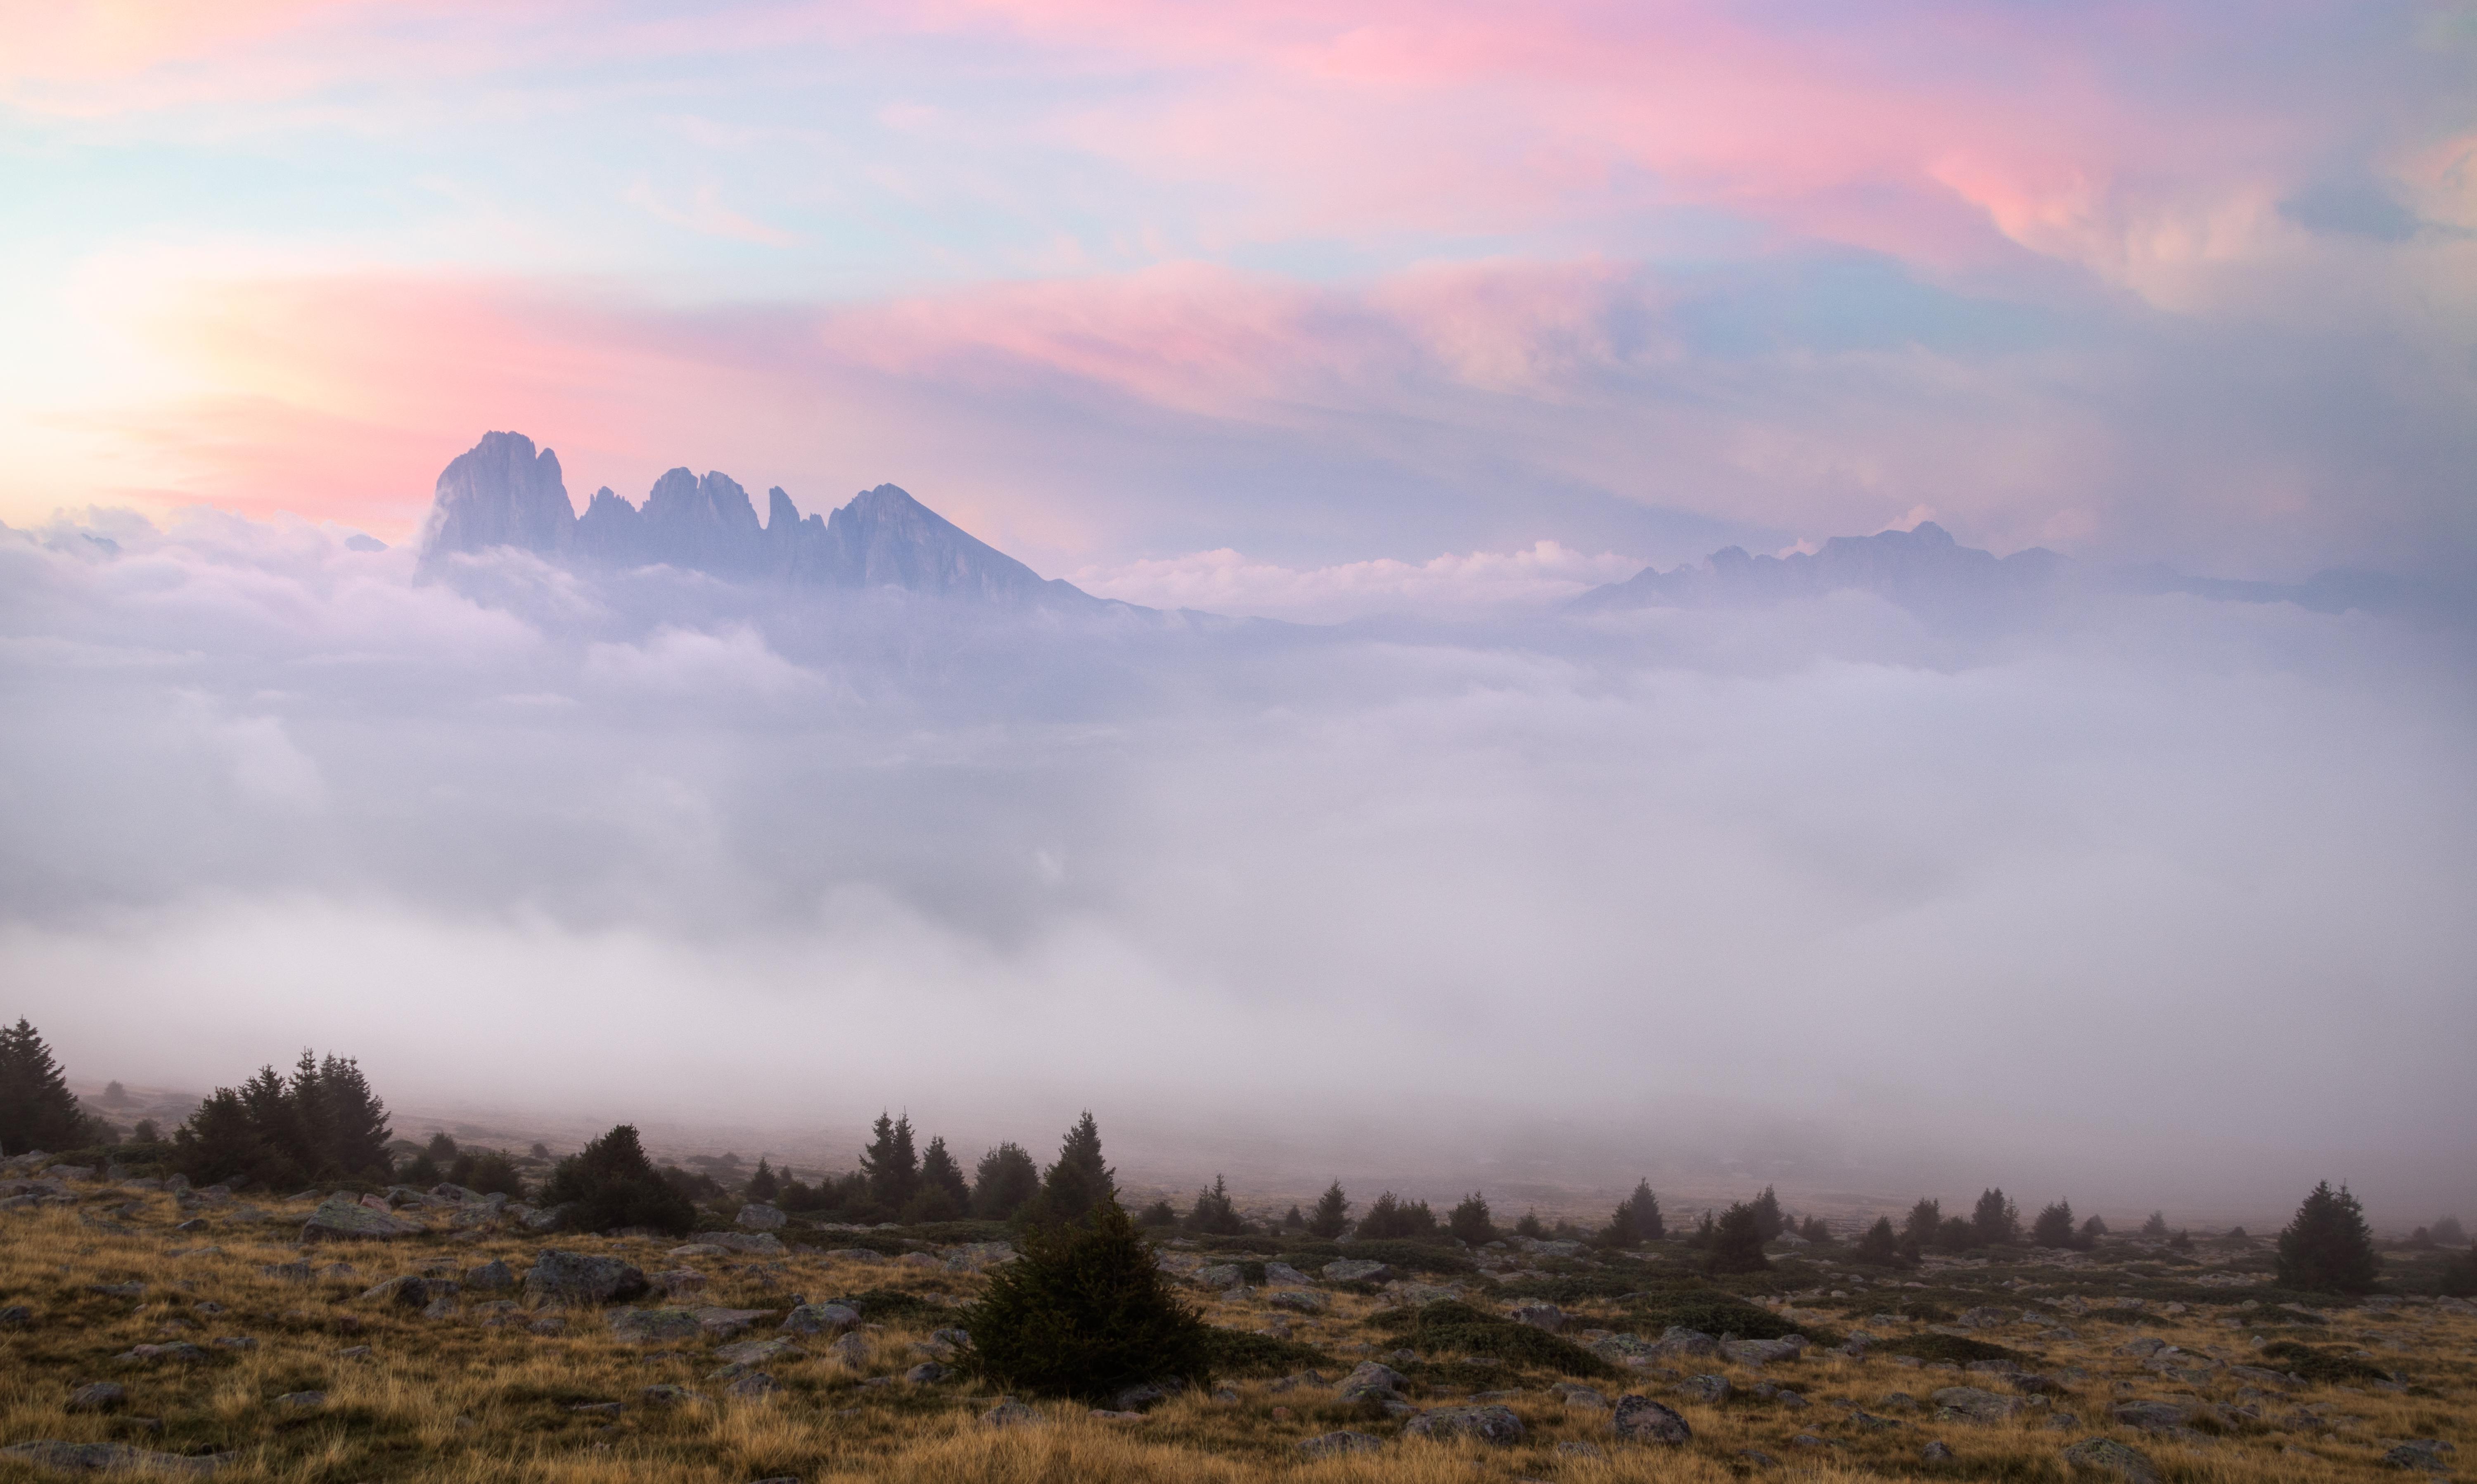 General 5999x3594 Dolomites mountains nature landscape Italy clouds sunset mist trees